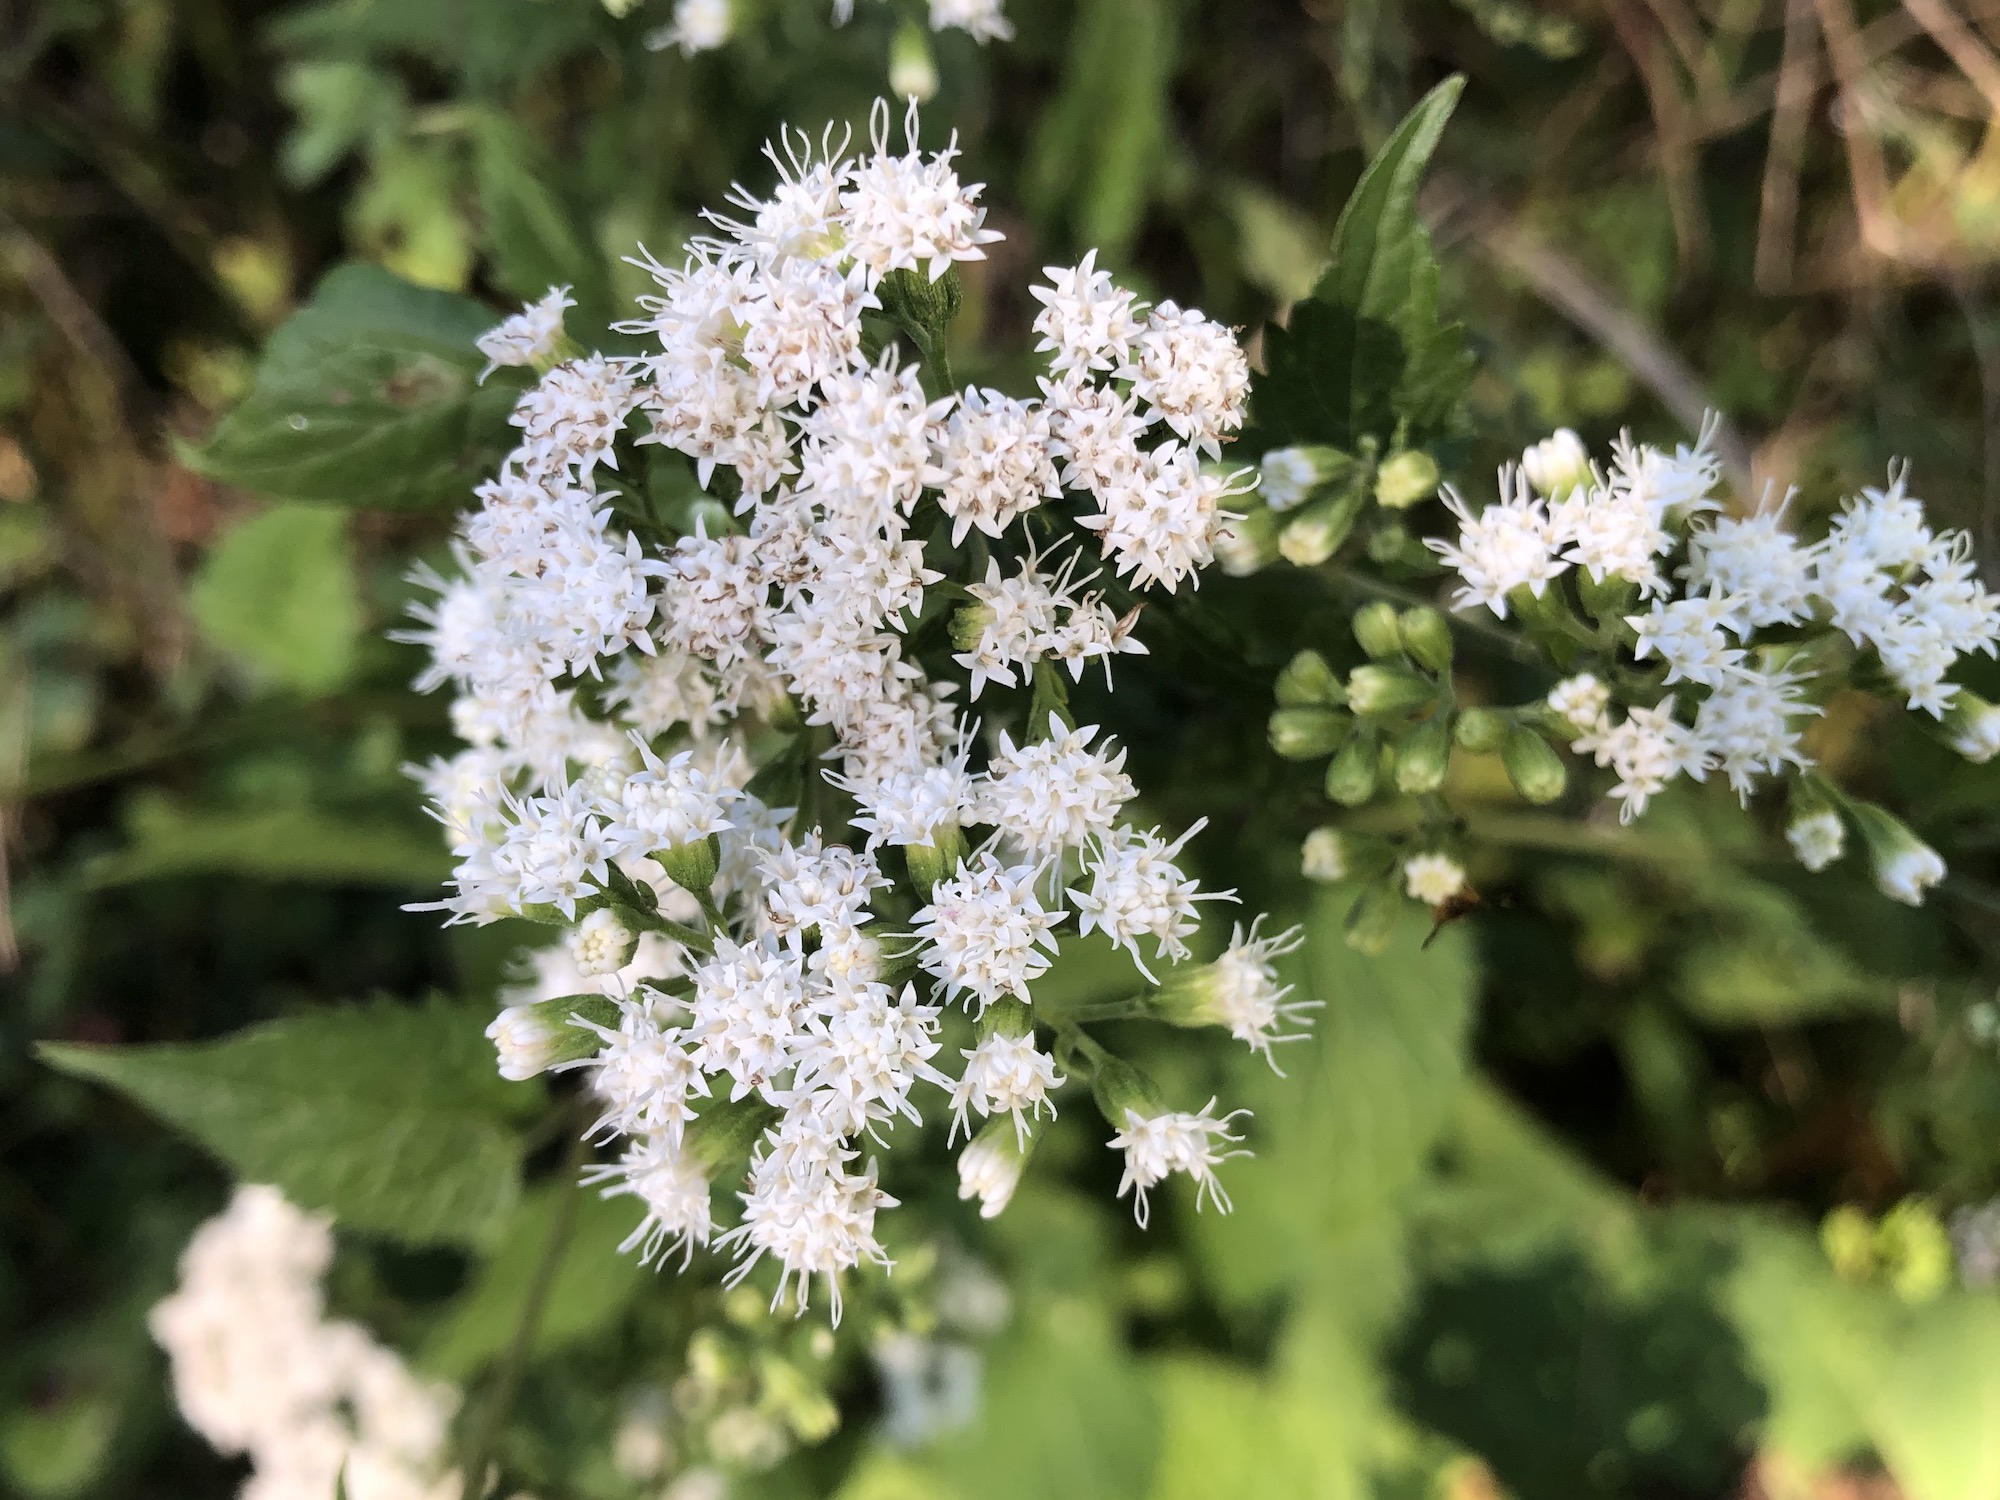 White Snakeroot by Agawa Path in Madison, Wisconsin on September 4, 2020.